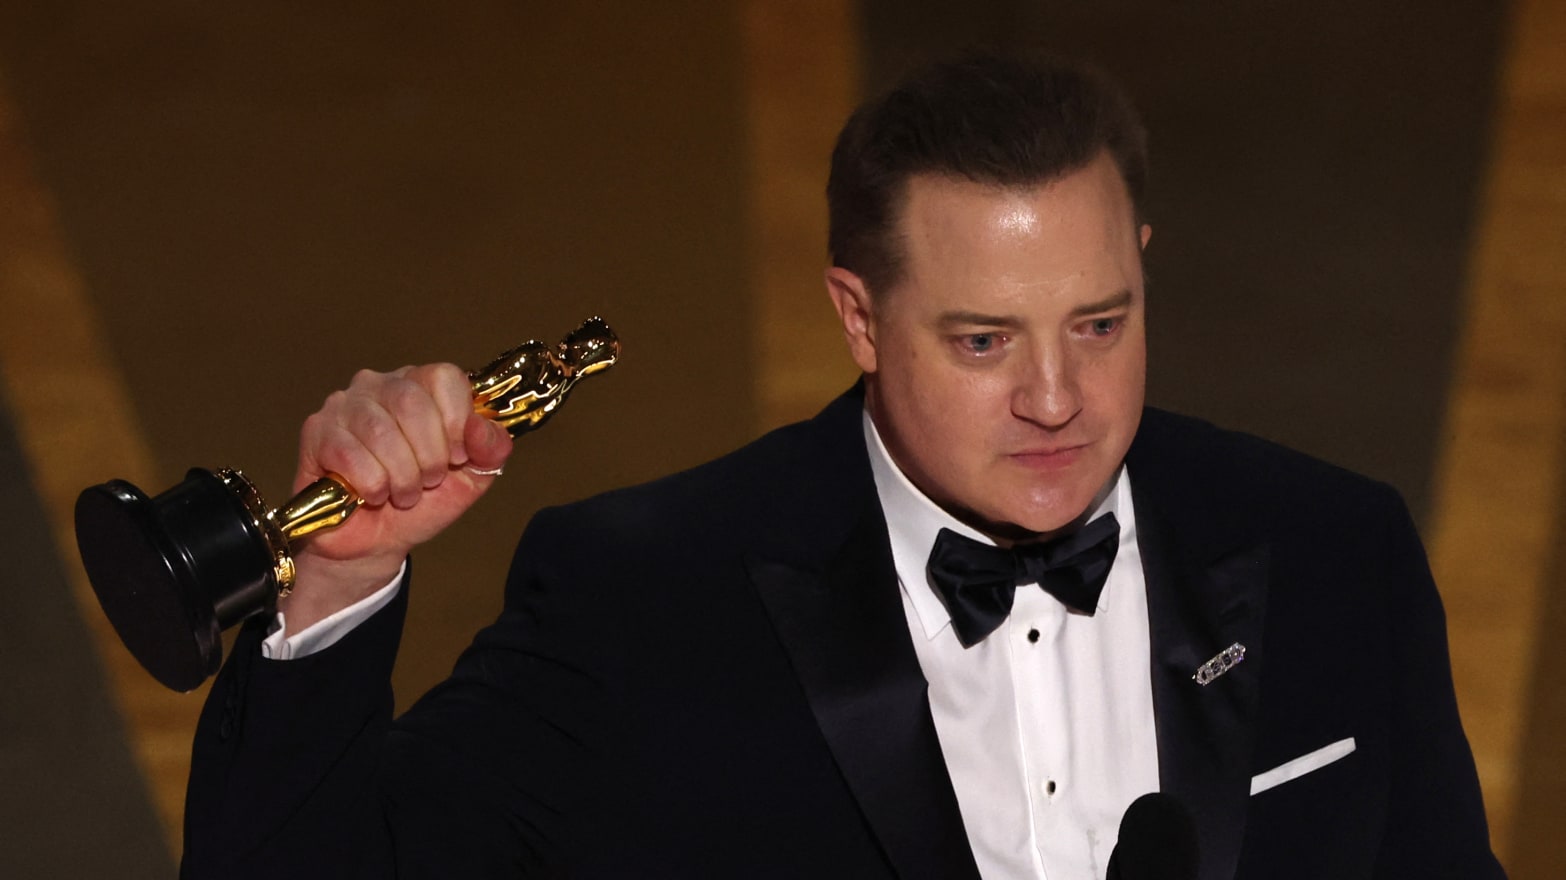 Oscars Brendan Fraser Cries During Best Actor Speech for ‘The Whale’